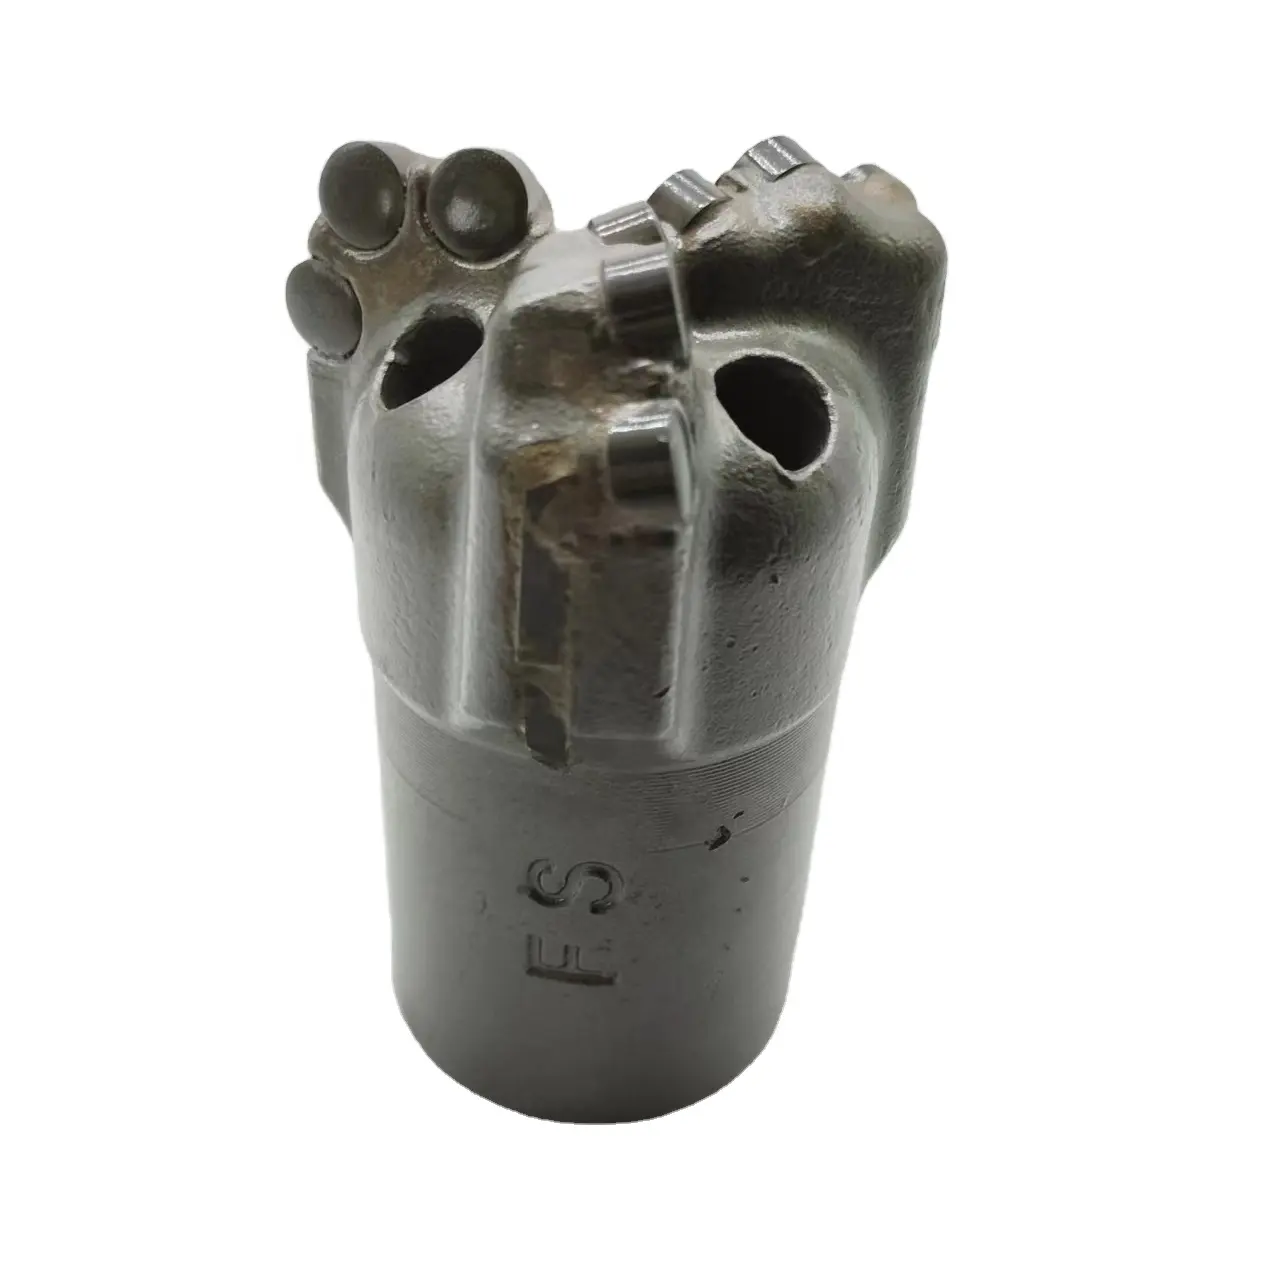 Three wing rock The arc angle drill bit is used for the coal mine varsity discharge hole